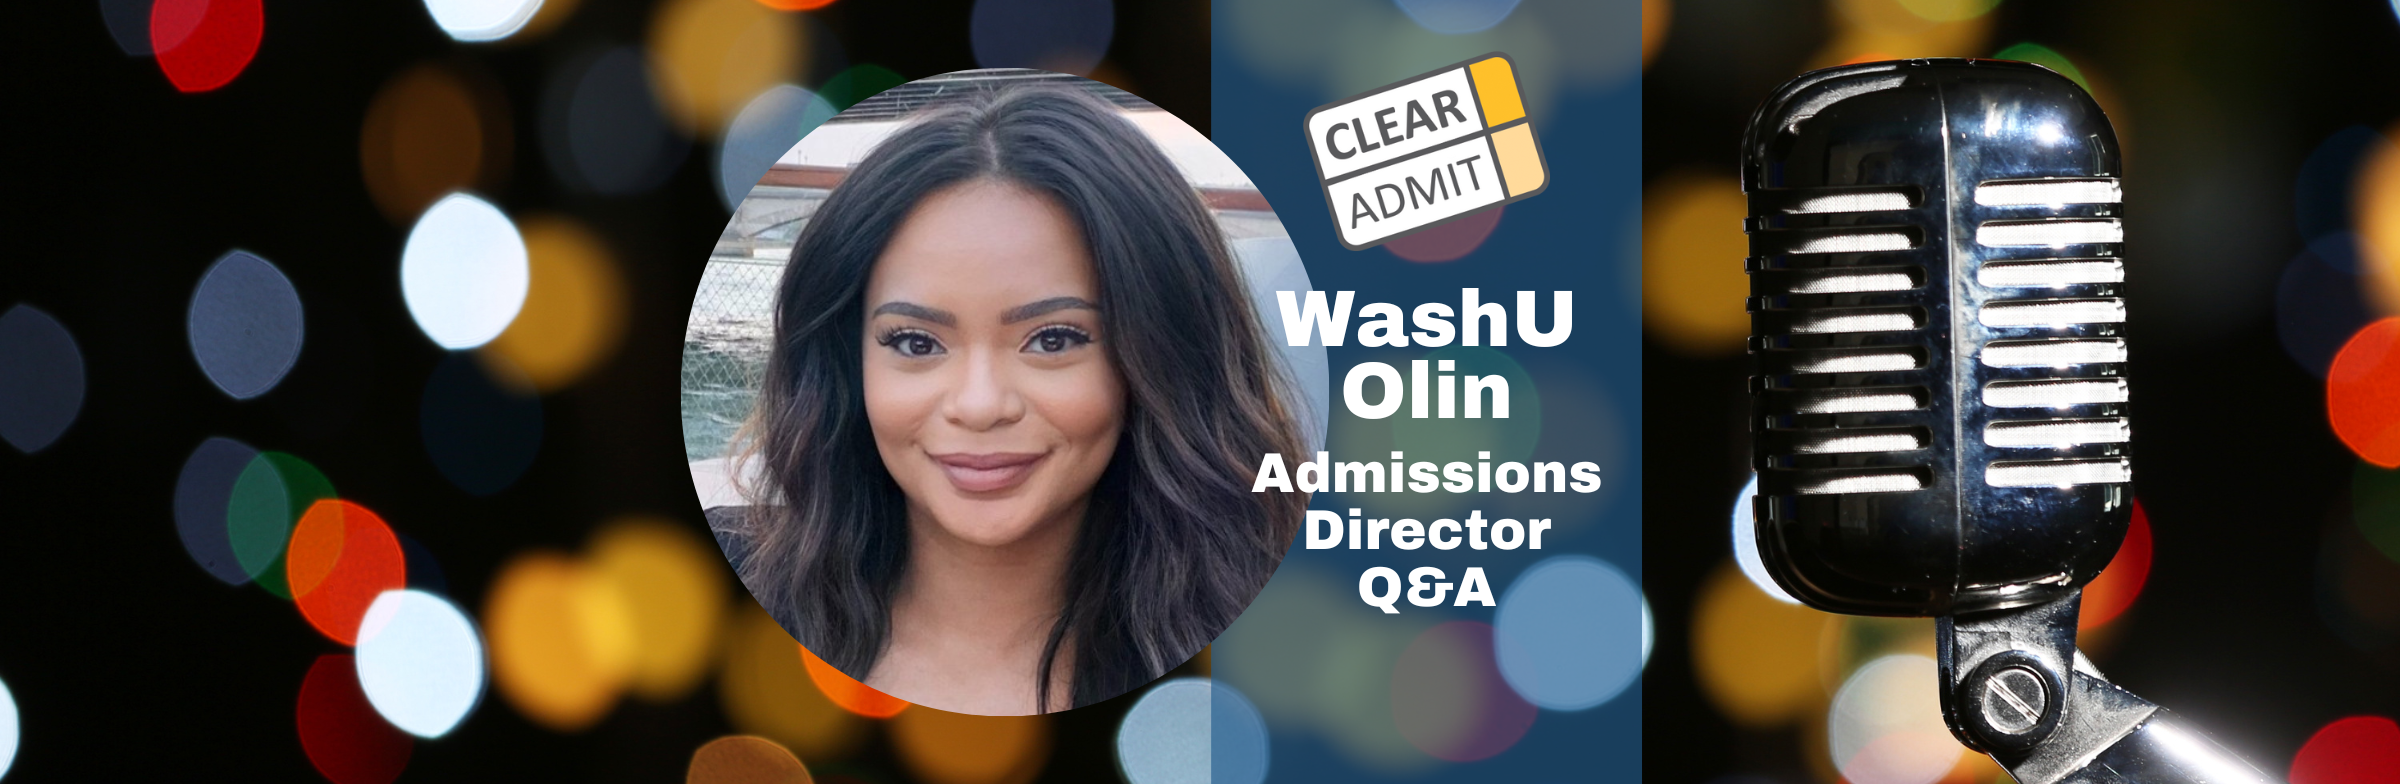 Image for Admissions Director Q&A: Mikale Elliott of WashU Olin